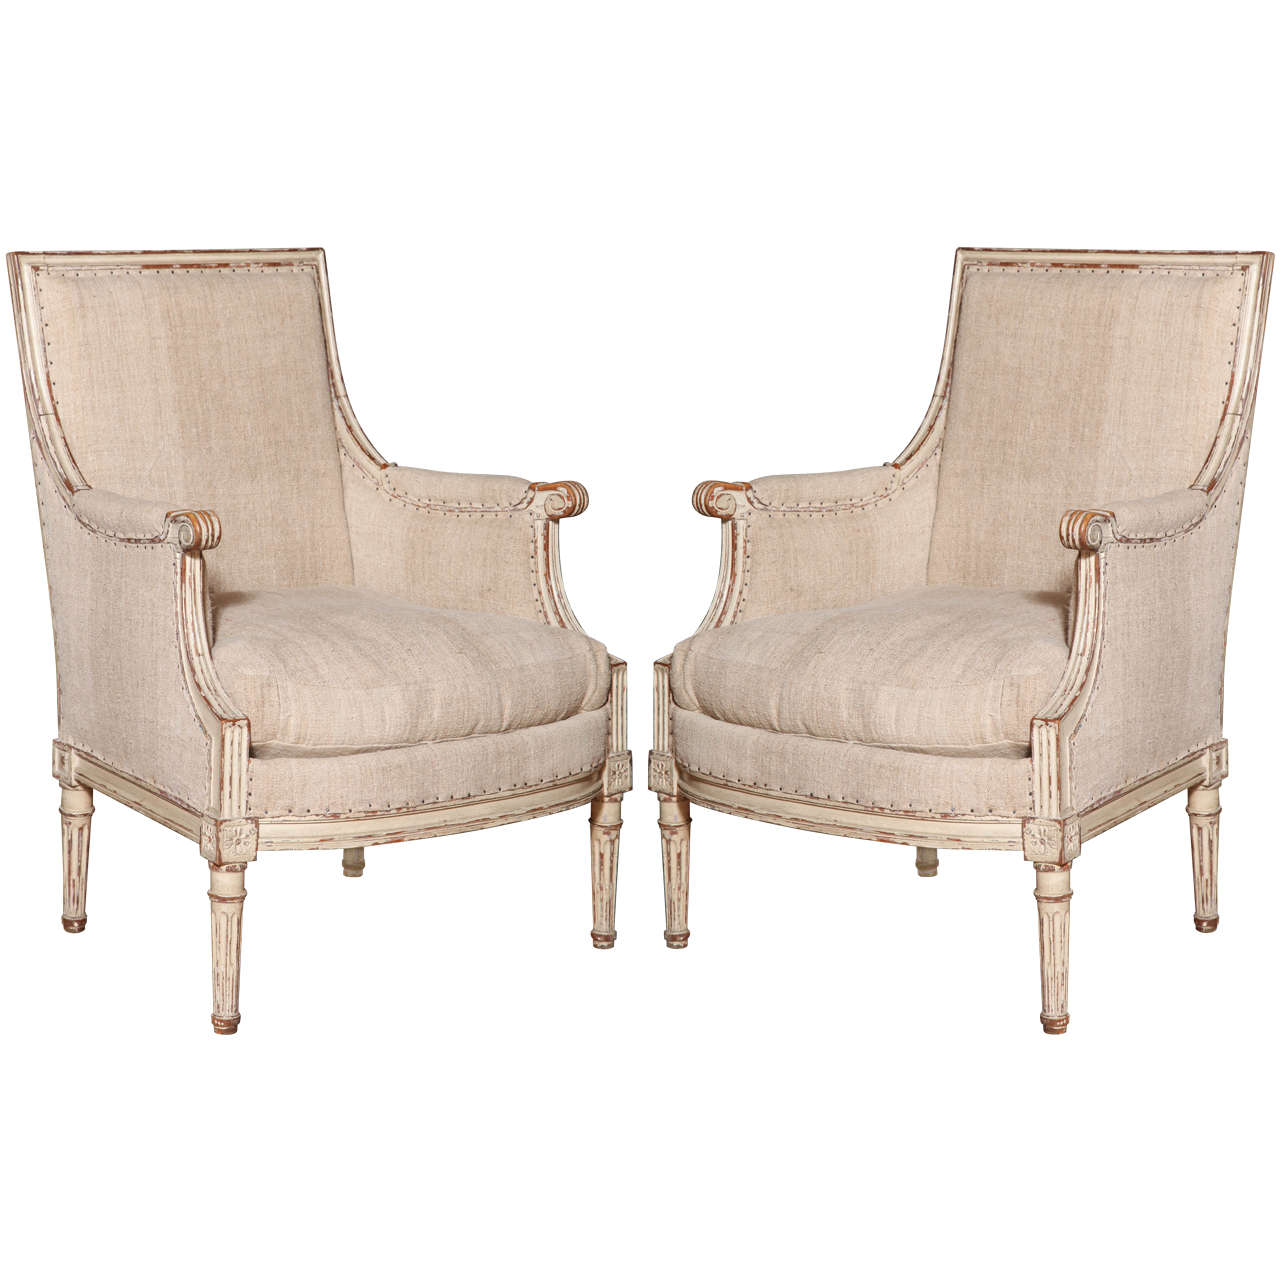 A Pair of Louis XVI Style Bergere Chairs, France 19th Century